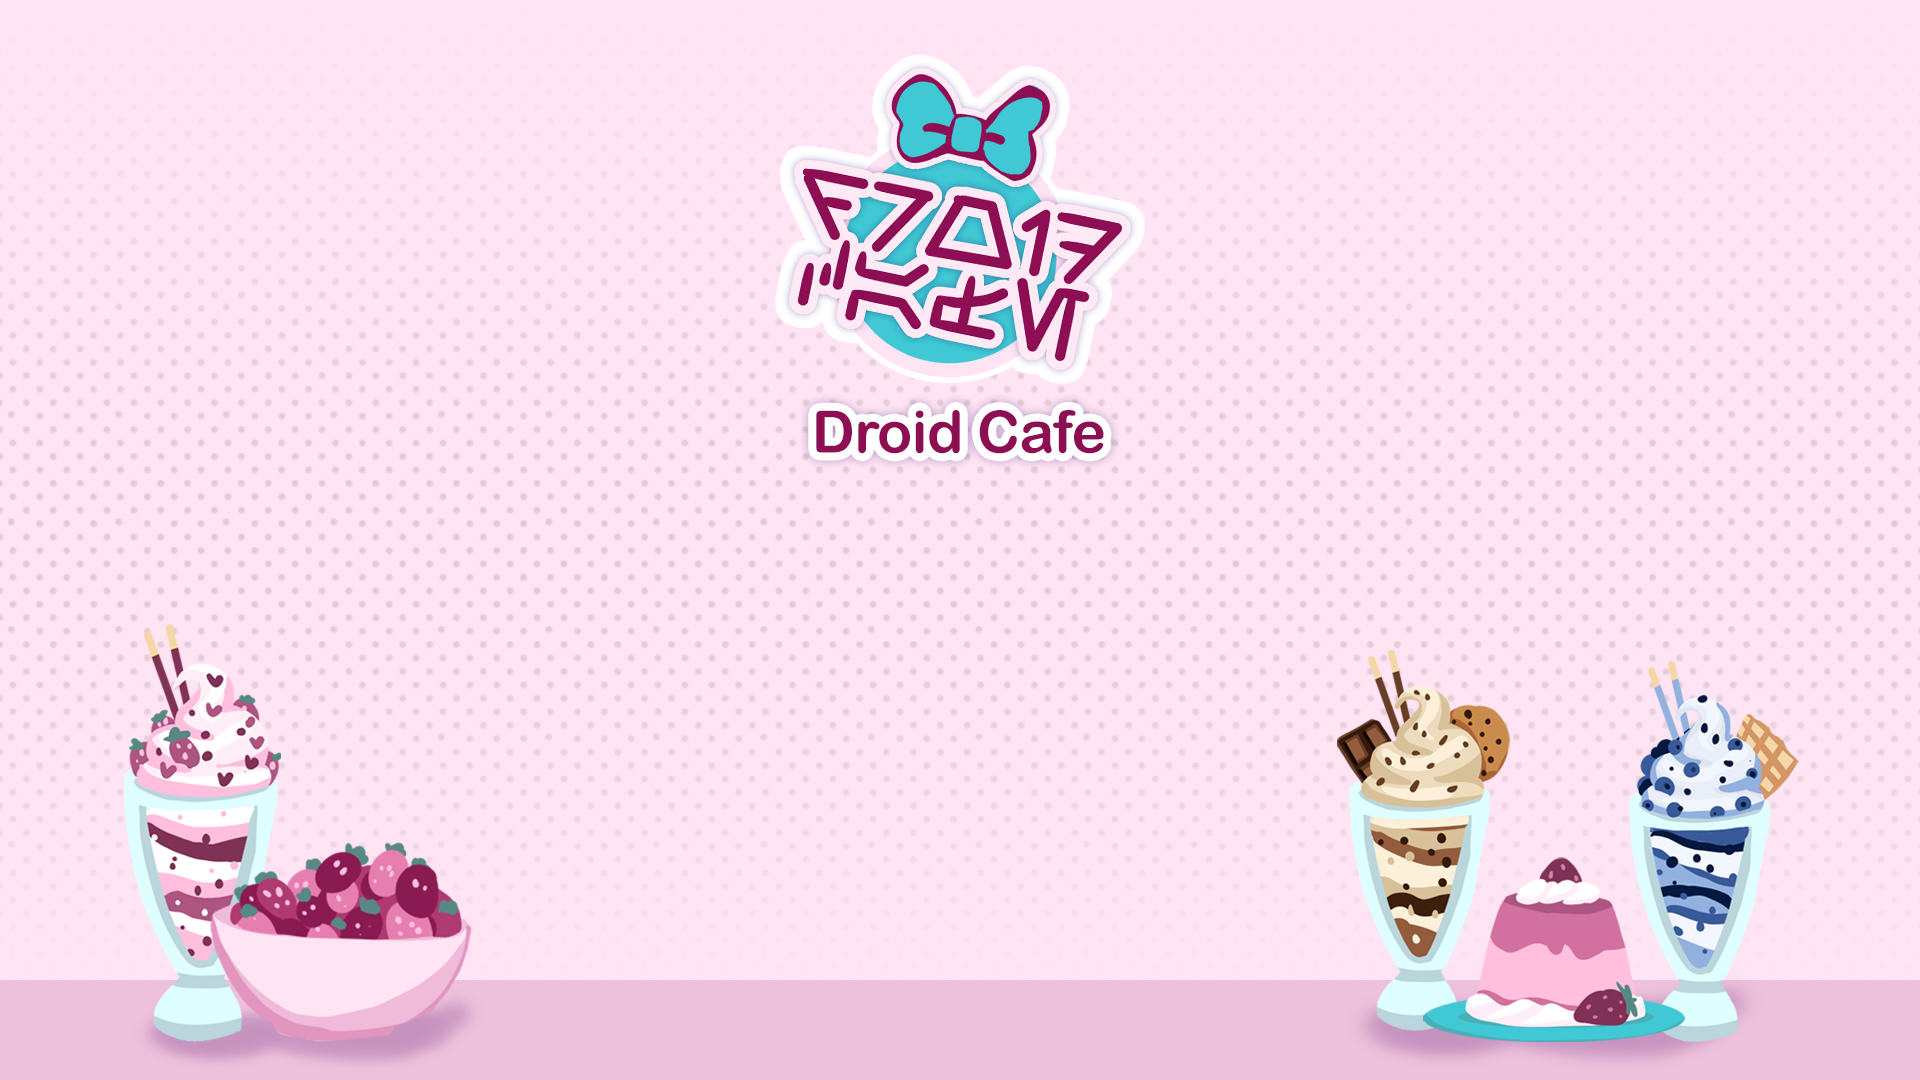 Droid Cafe